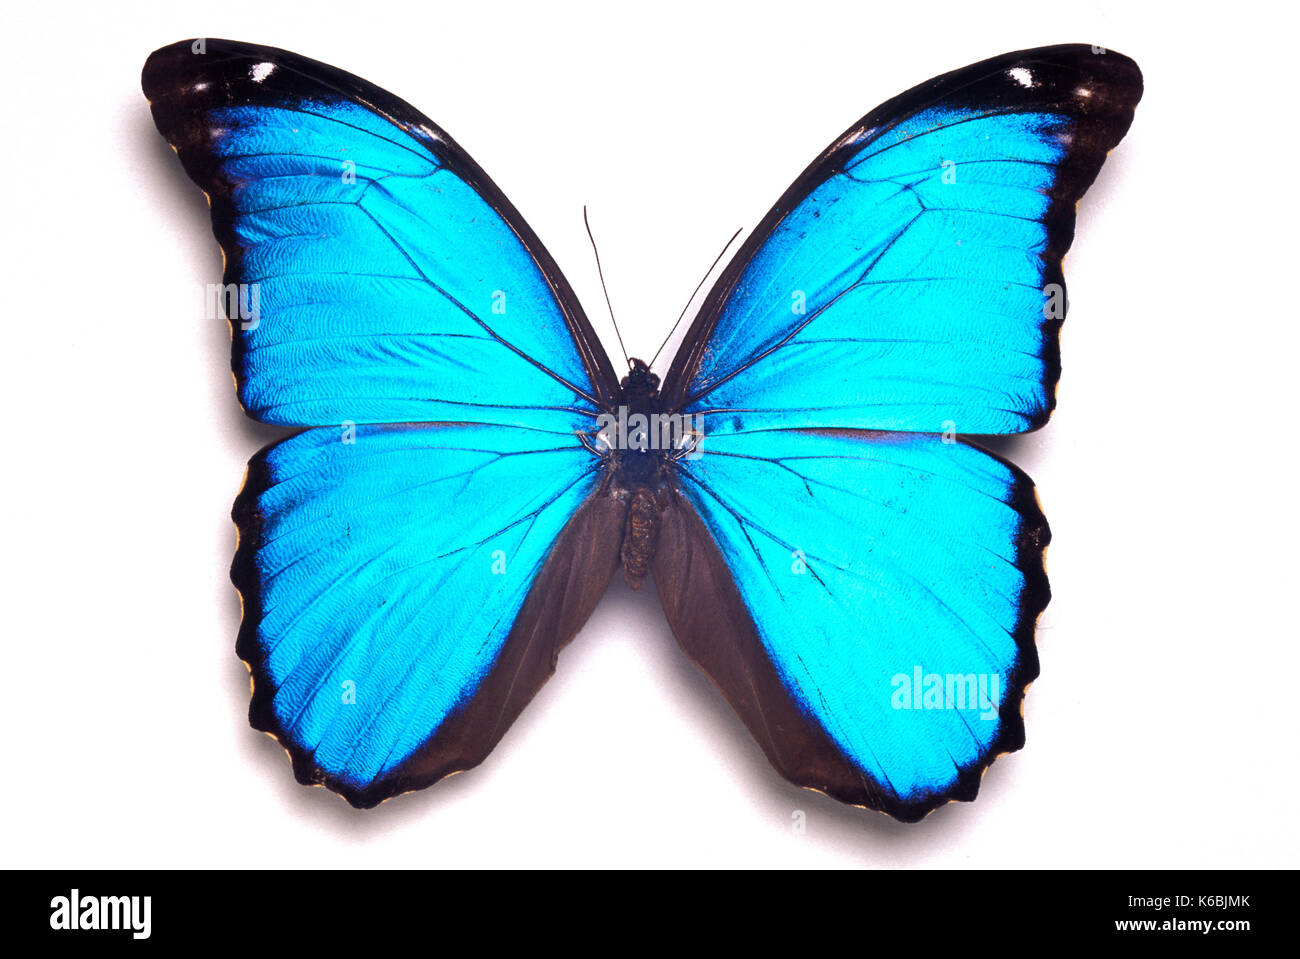 Morpho butterfly  (Morpho peleides)  open wings blue irridescent, white background cut out Stock Photo